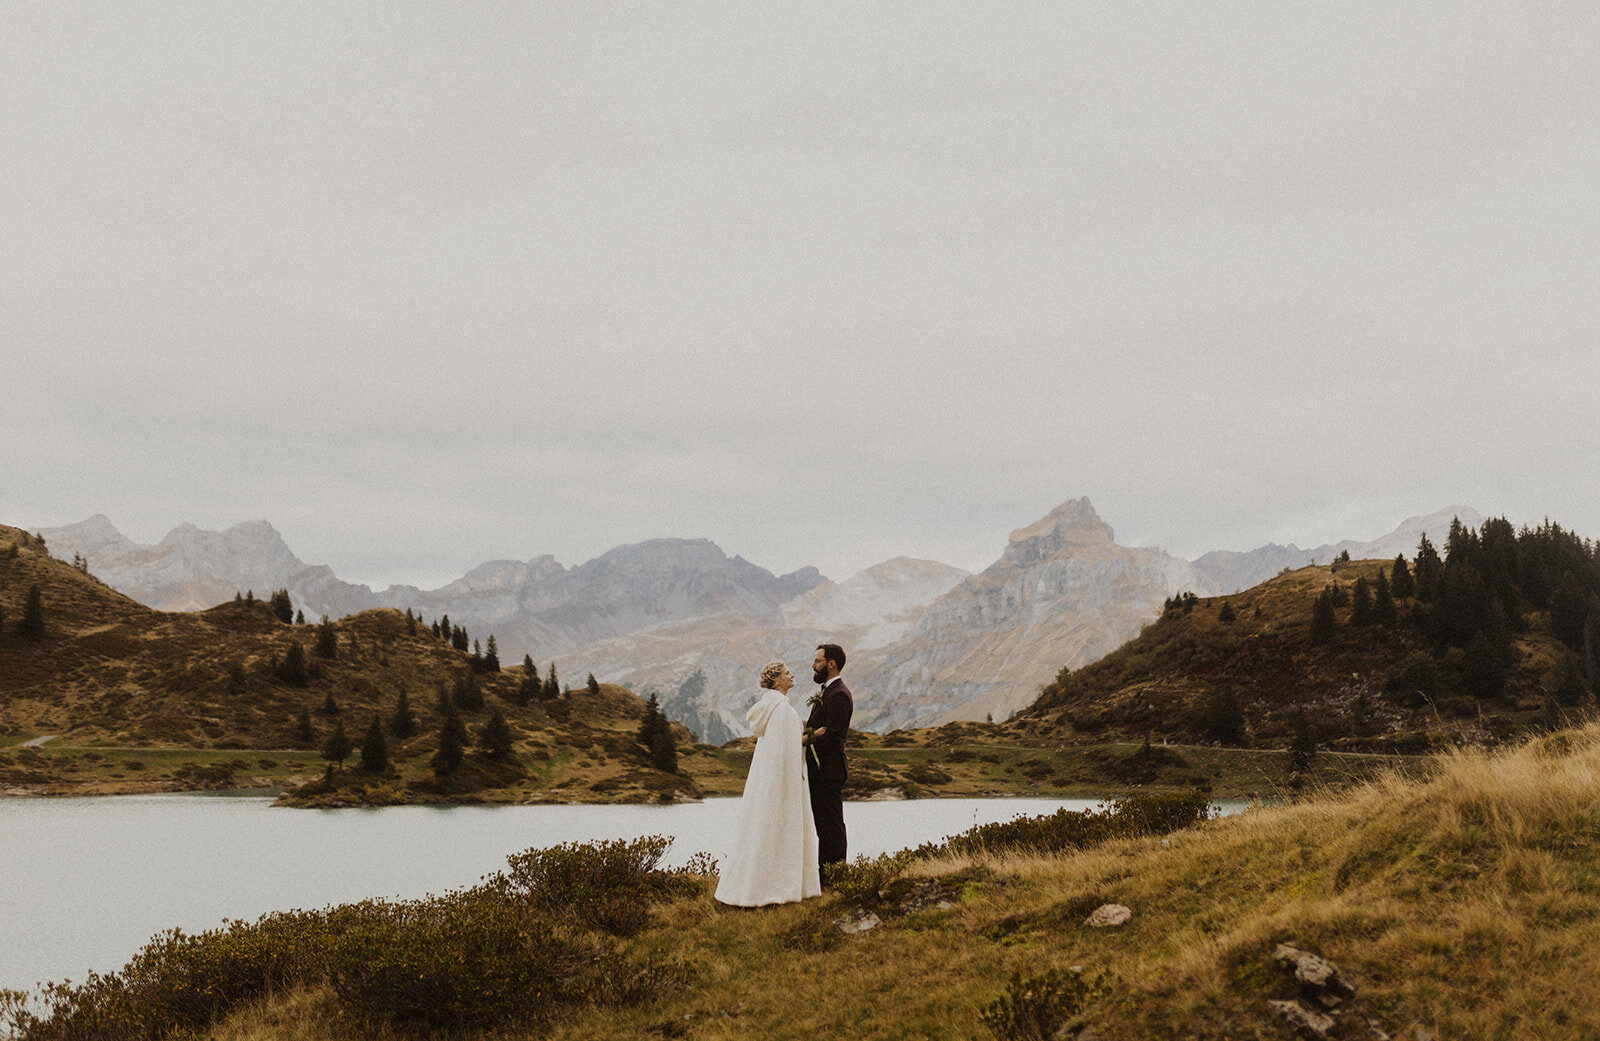 A wedding couple at Trübsee in central Switzerland on their wedding day. Beautiful lake and mountains in the background.